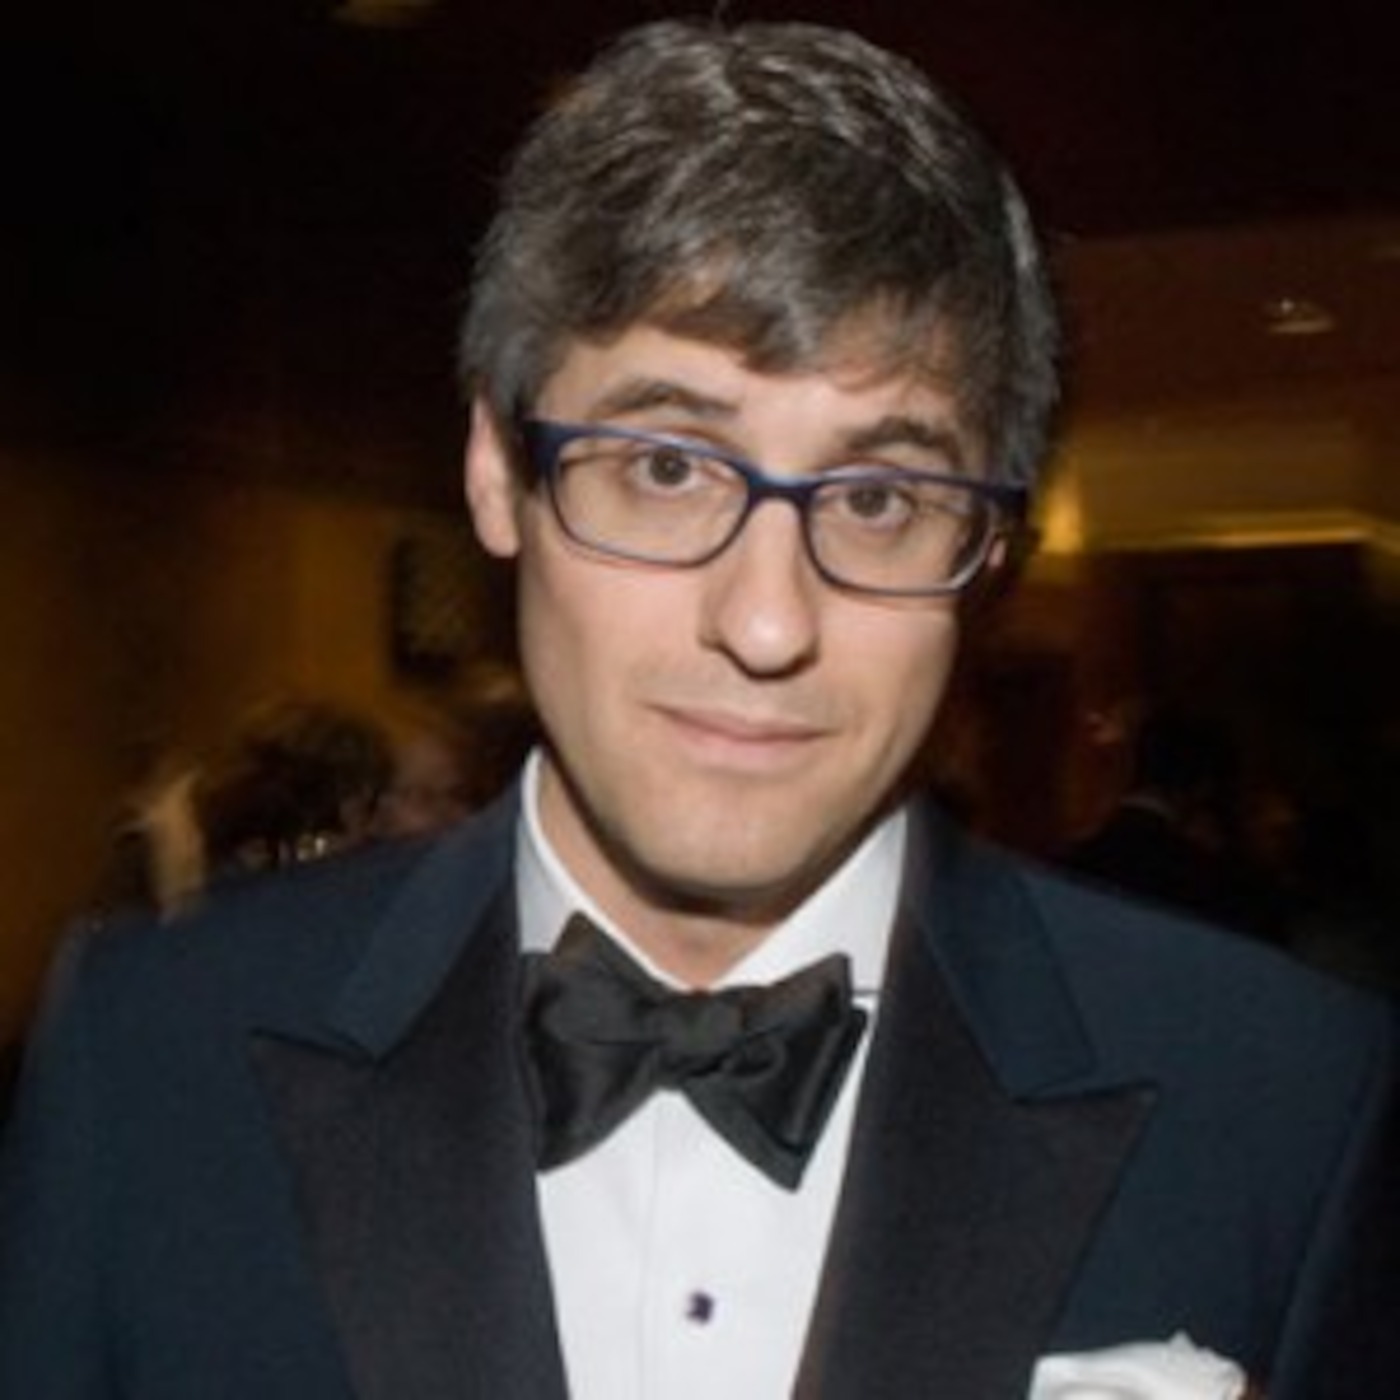 Mo Rocca interview with Poynter MediaWire